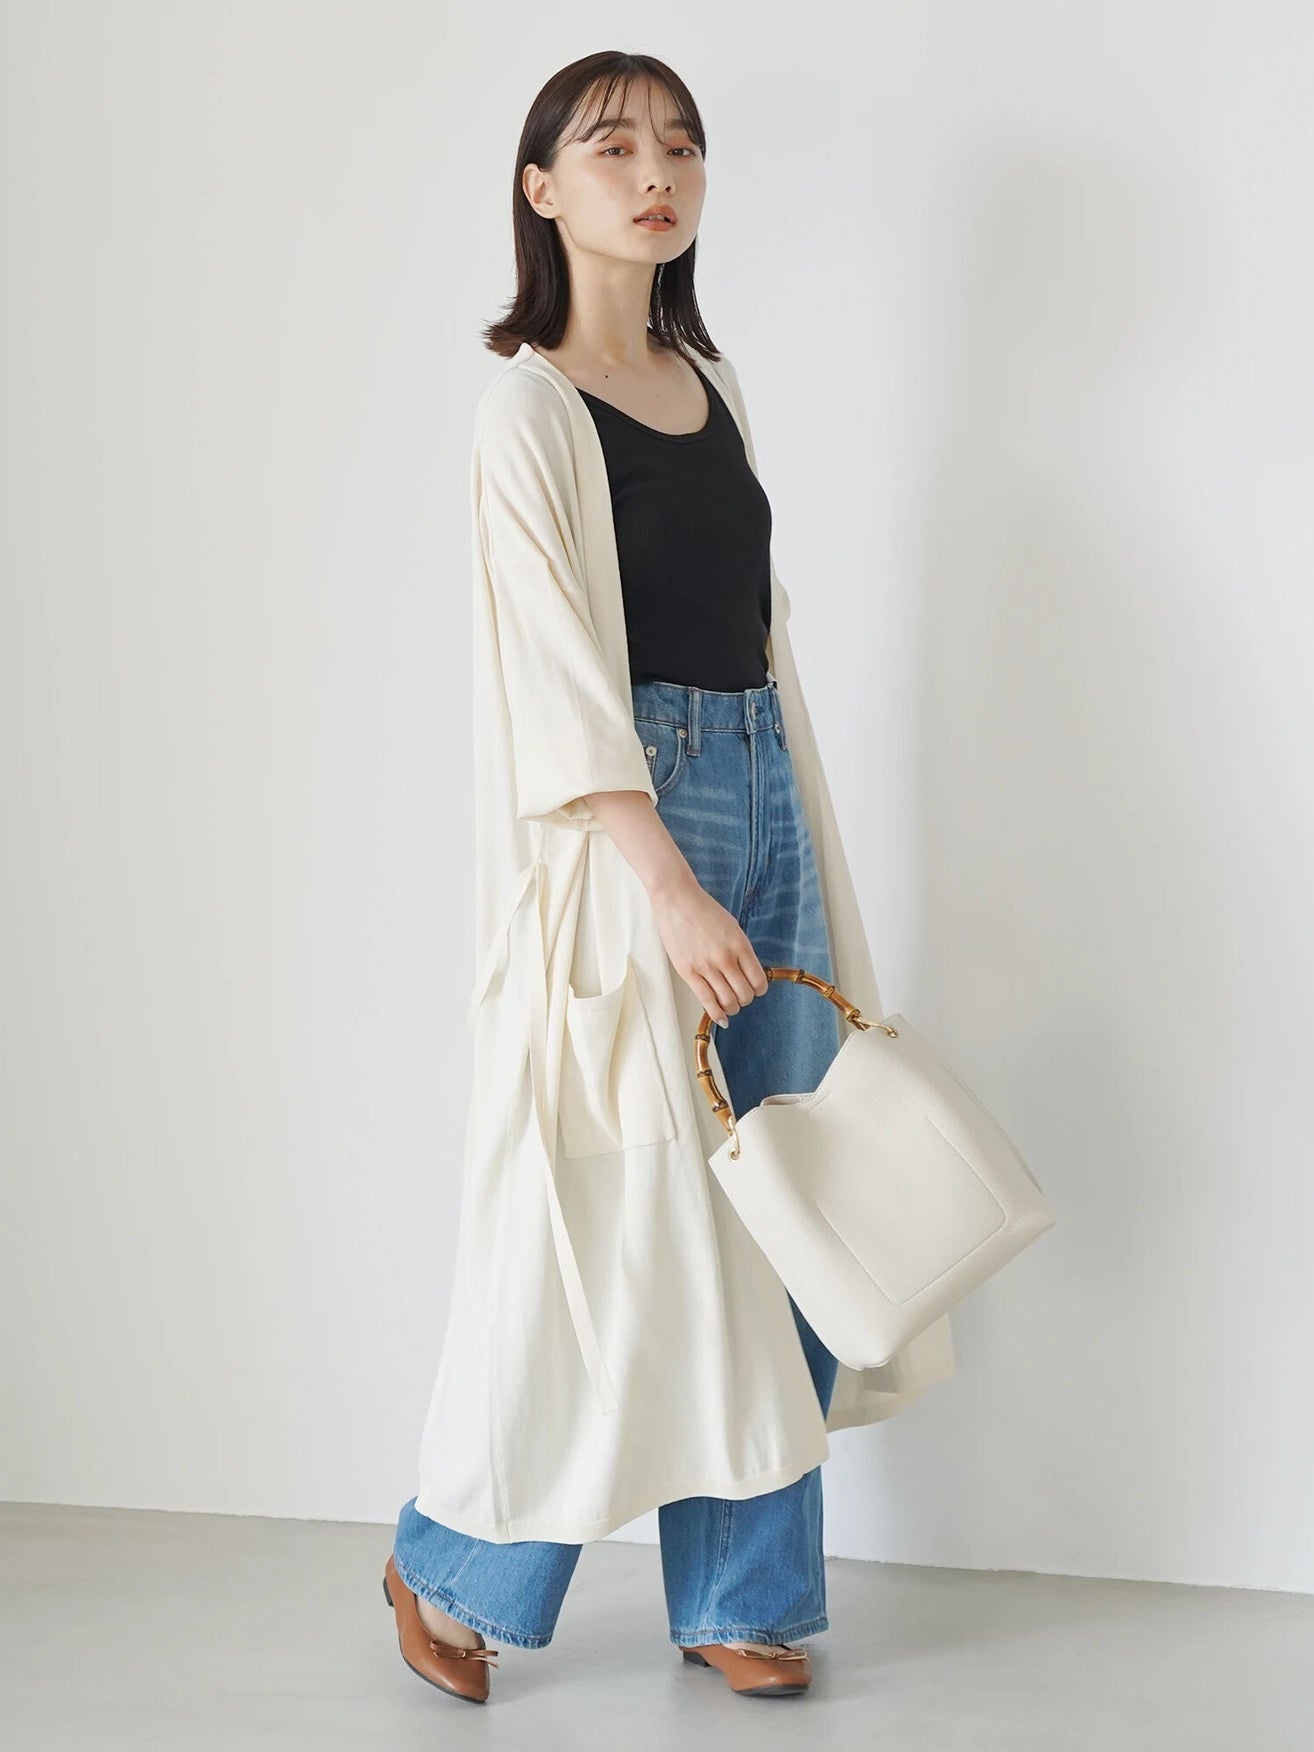 Lydia Knit Long Cardigan with Belt